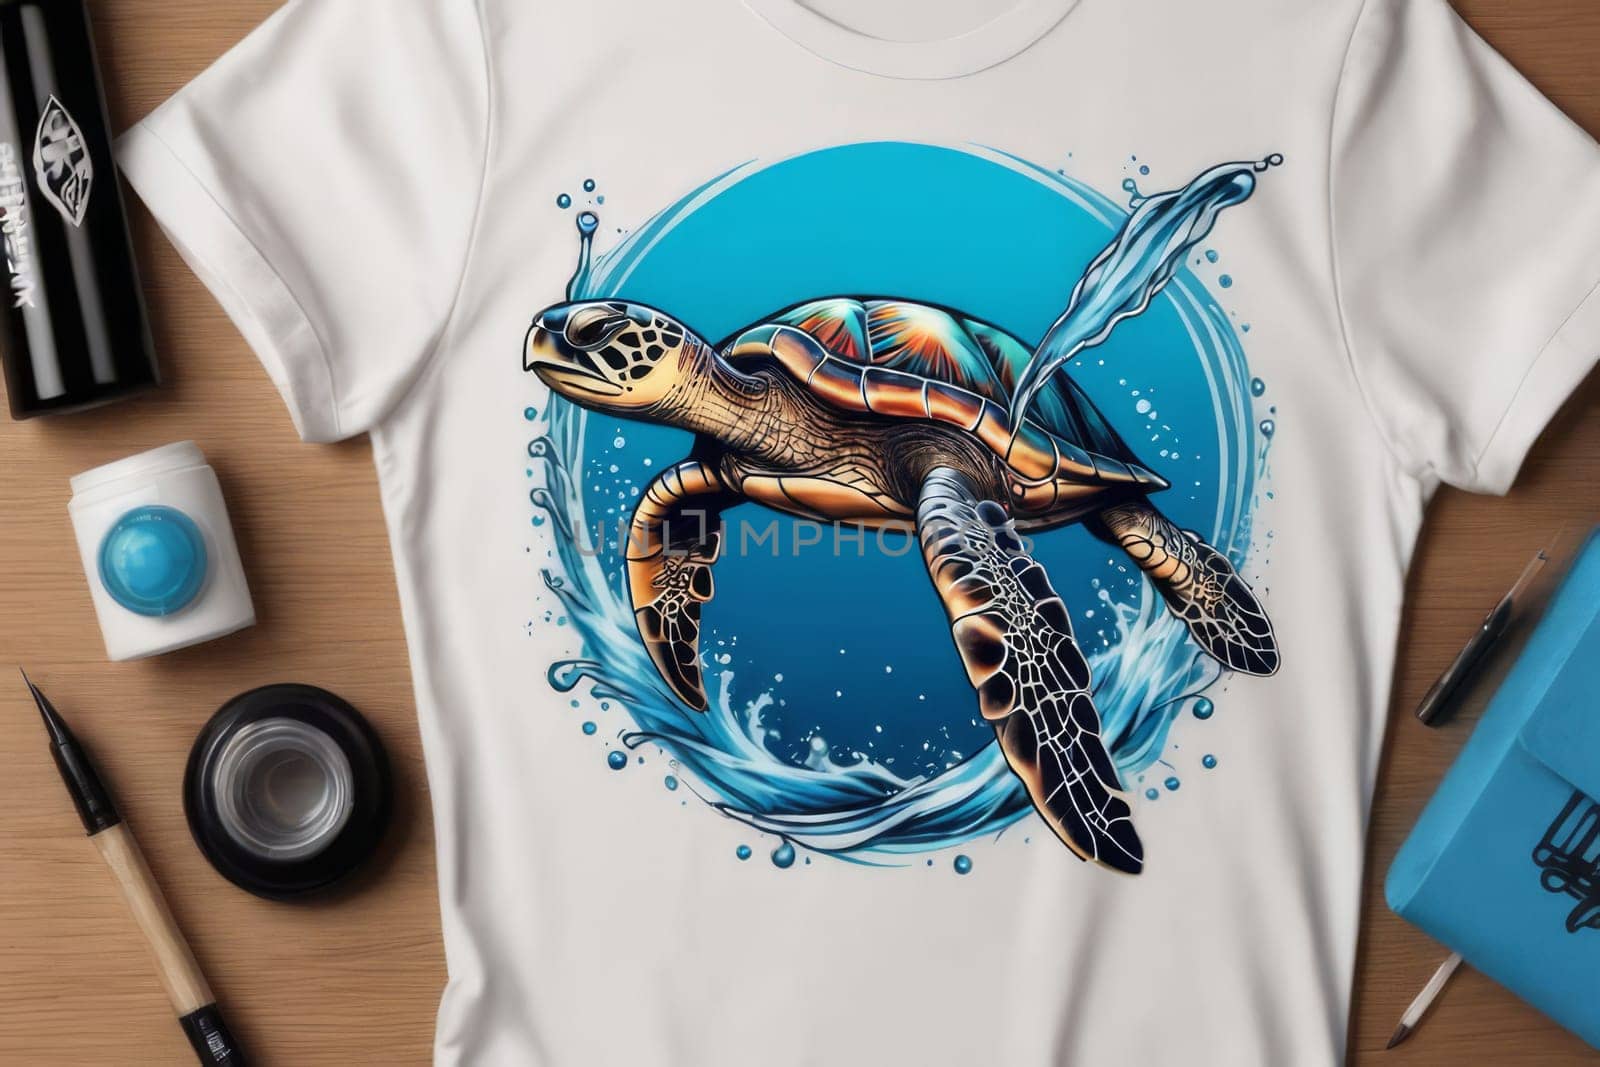 Majestic turtle gracefully swimming in blue ocean, depicted on tshirt. For clothing design, animal themed clothing advertising, simply as illustration for interesting clothing style, Tshirt print